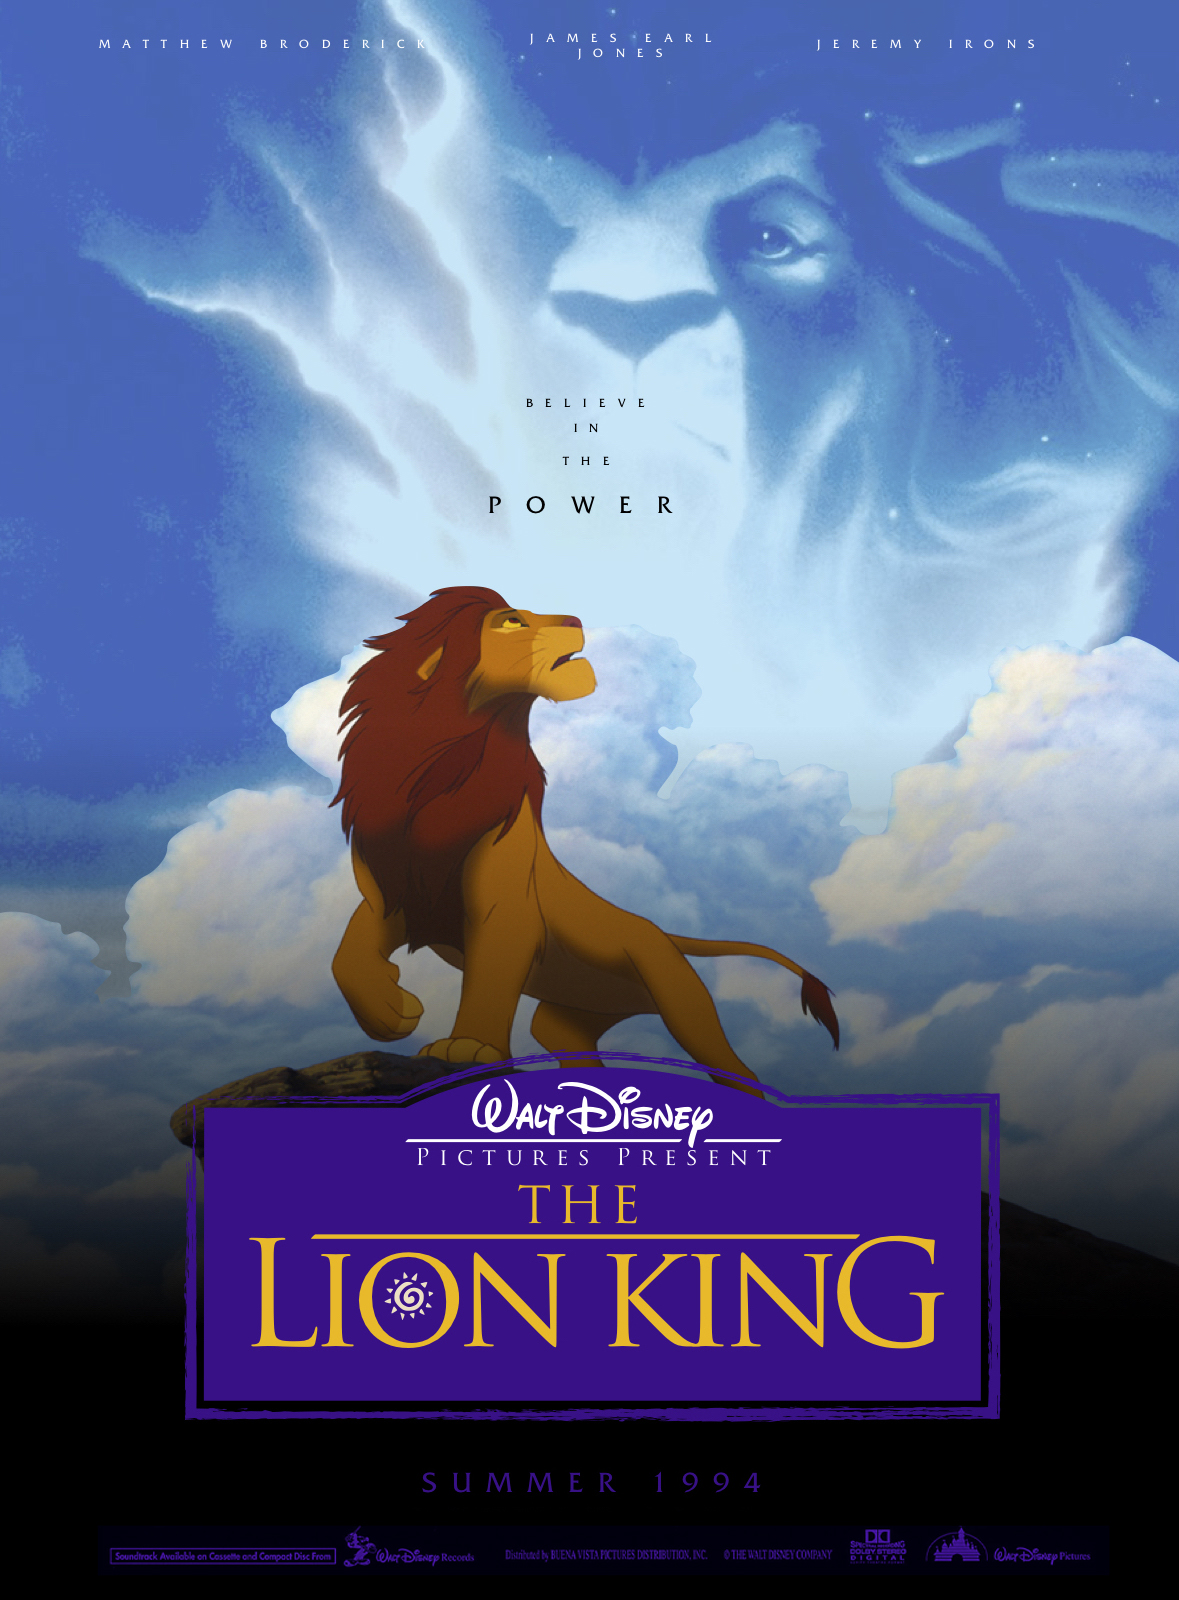 The Lion King (1994) - teaser by TheYoungHistorian on DeviantArt